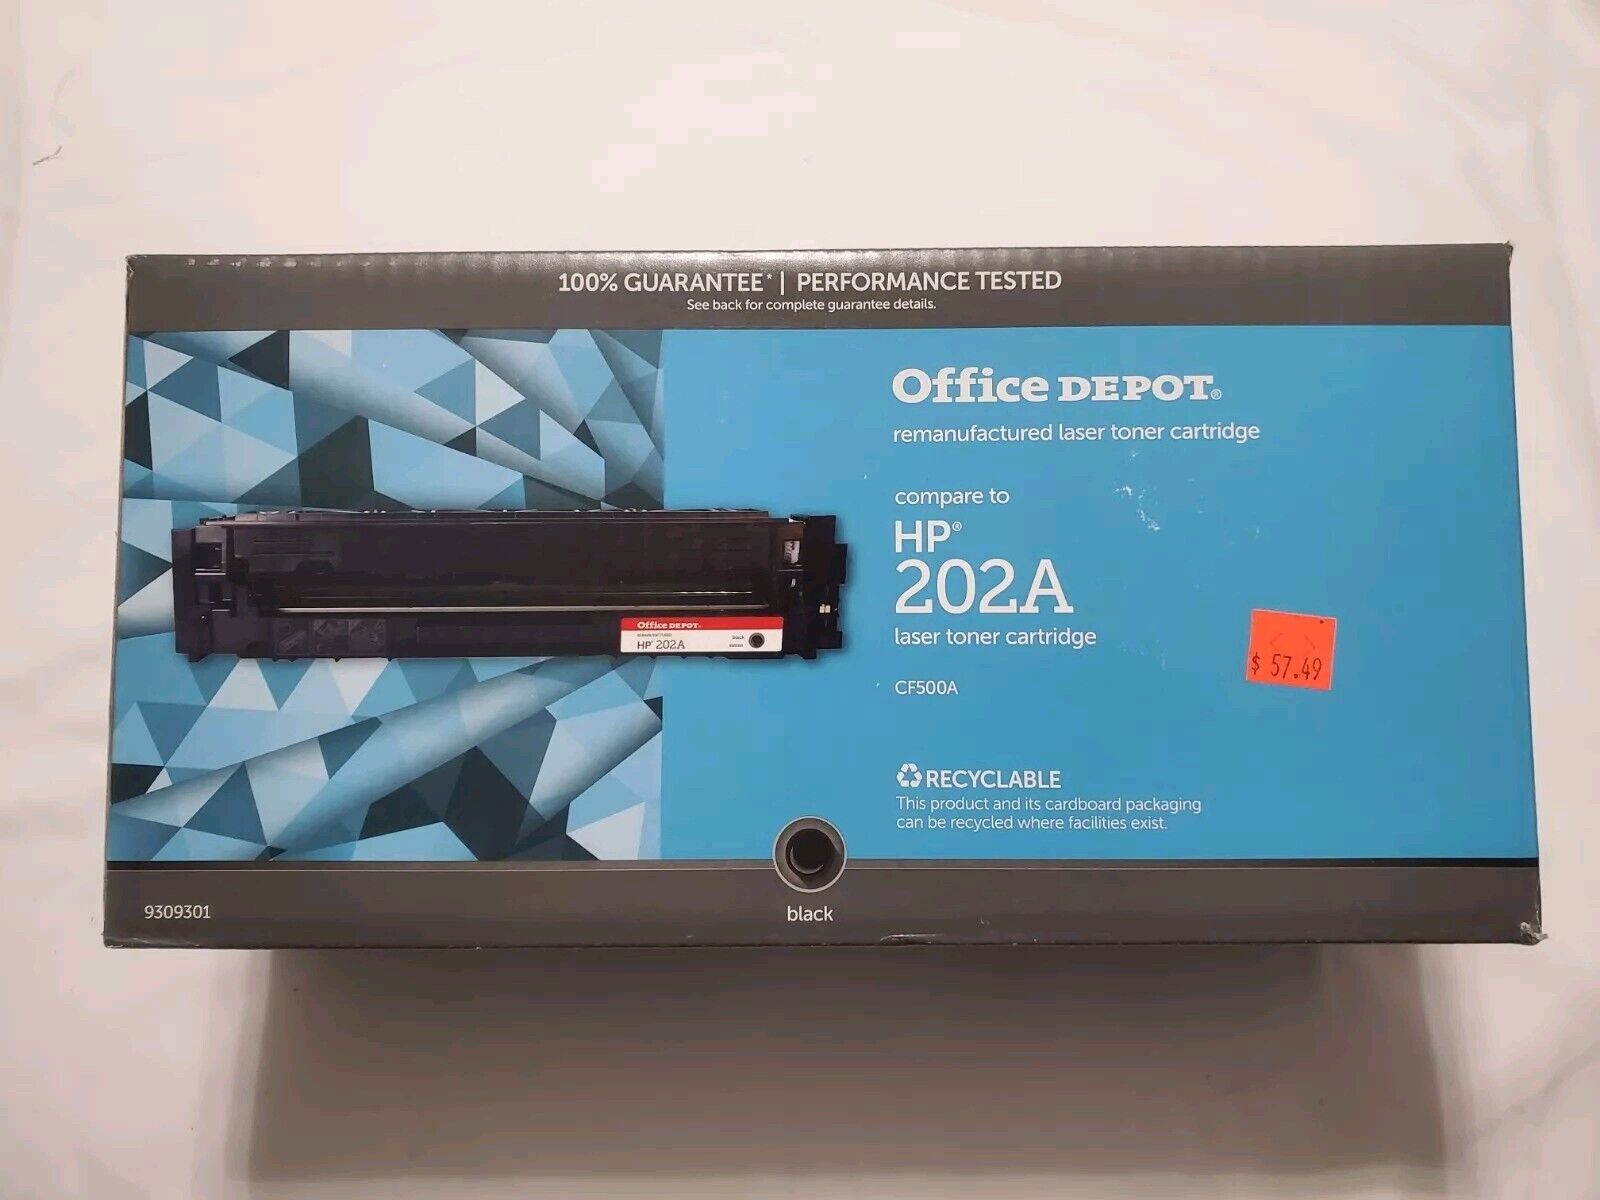 Office Depot Compared To HP 202A Laser Toner Cartridge Color Black CF500A